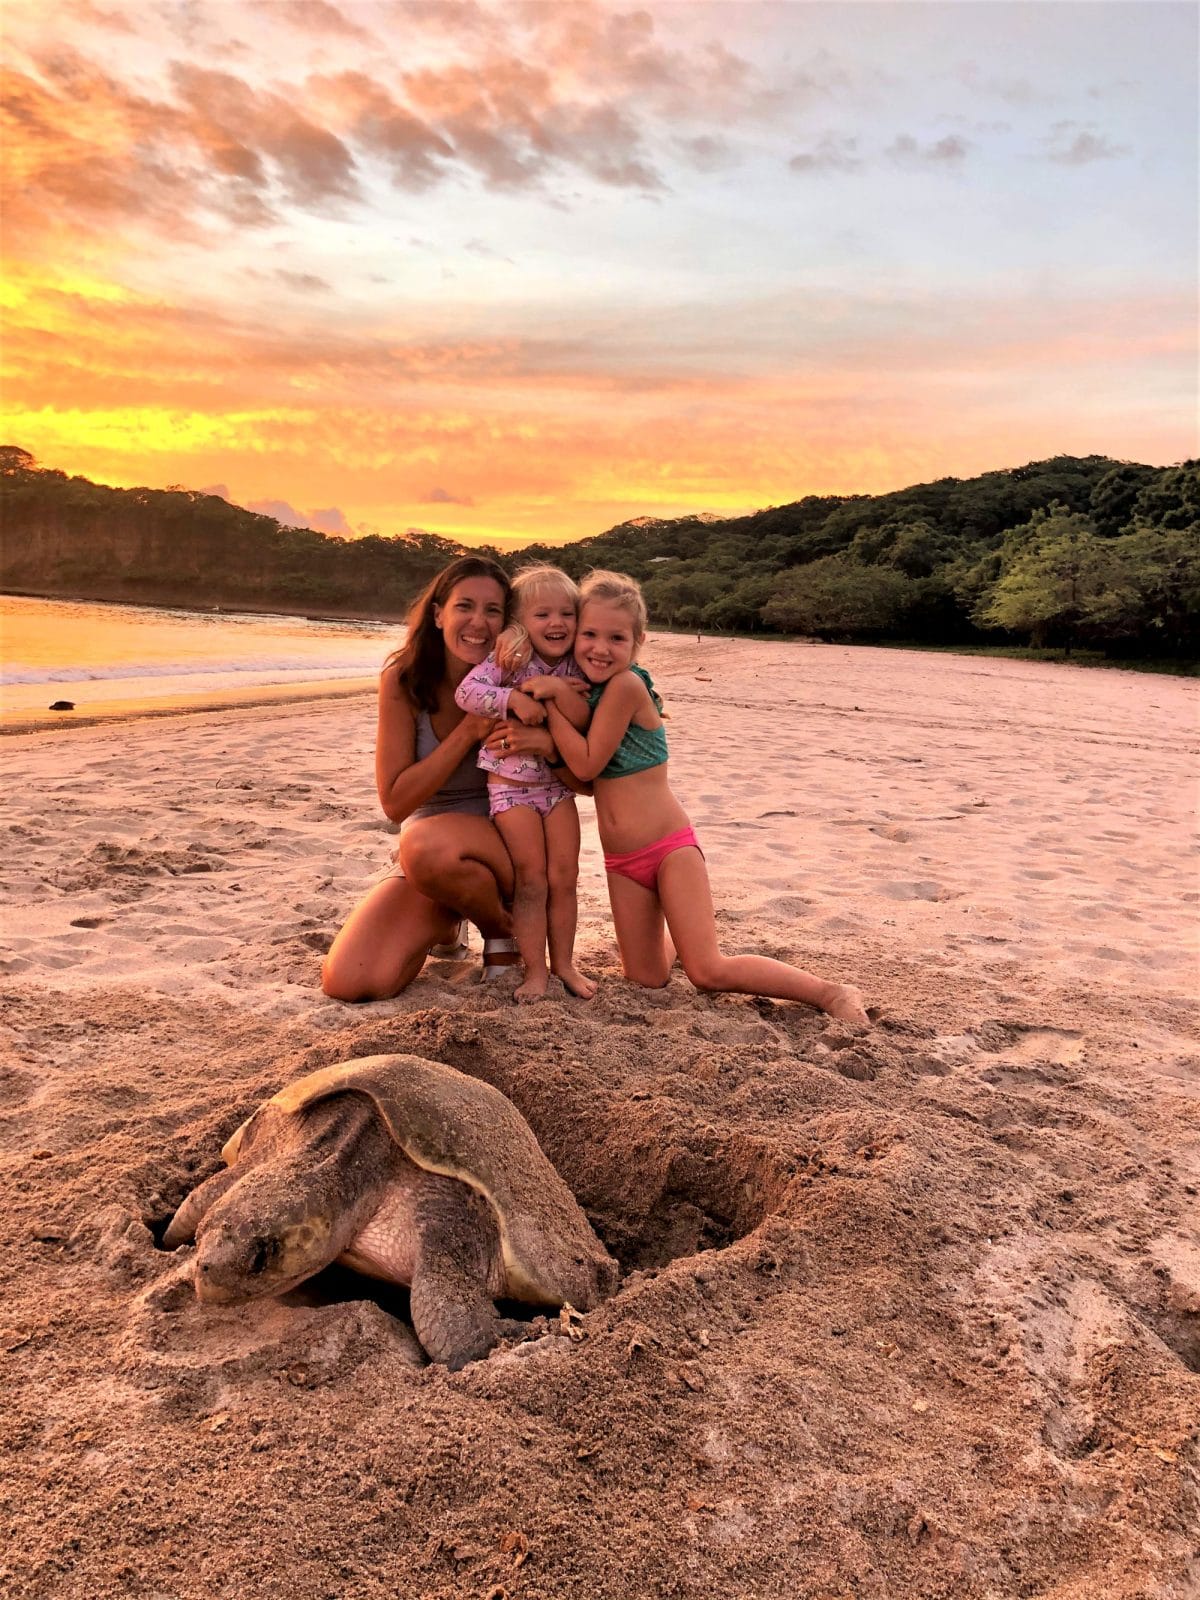 Sunset with a Turtle